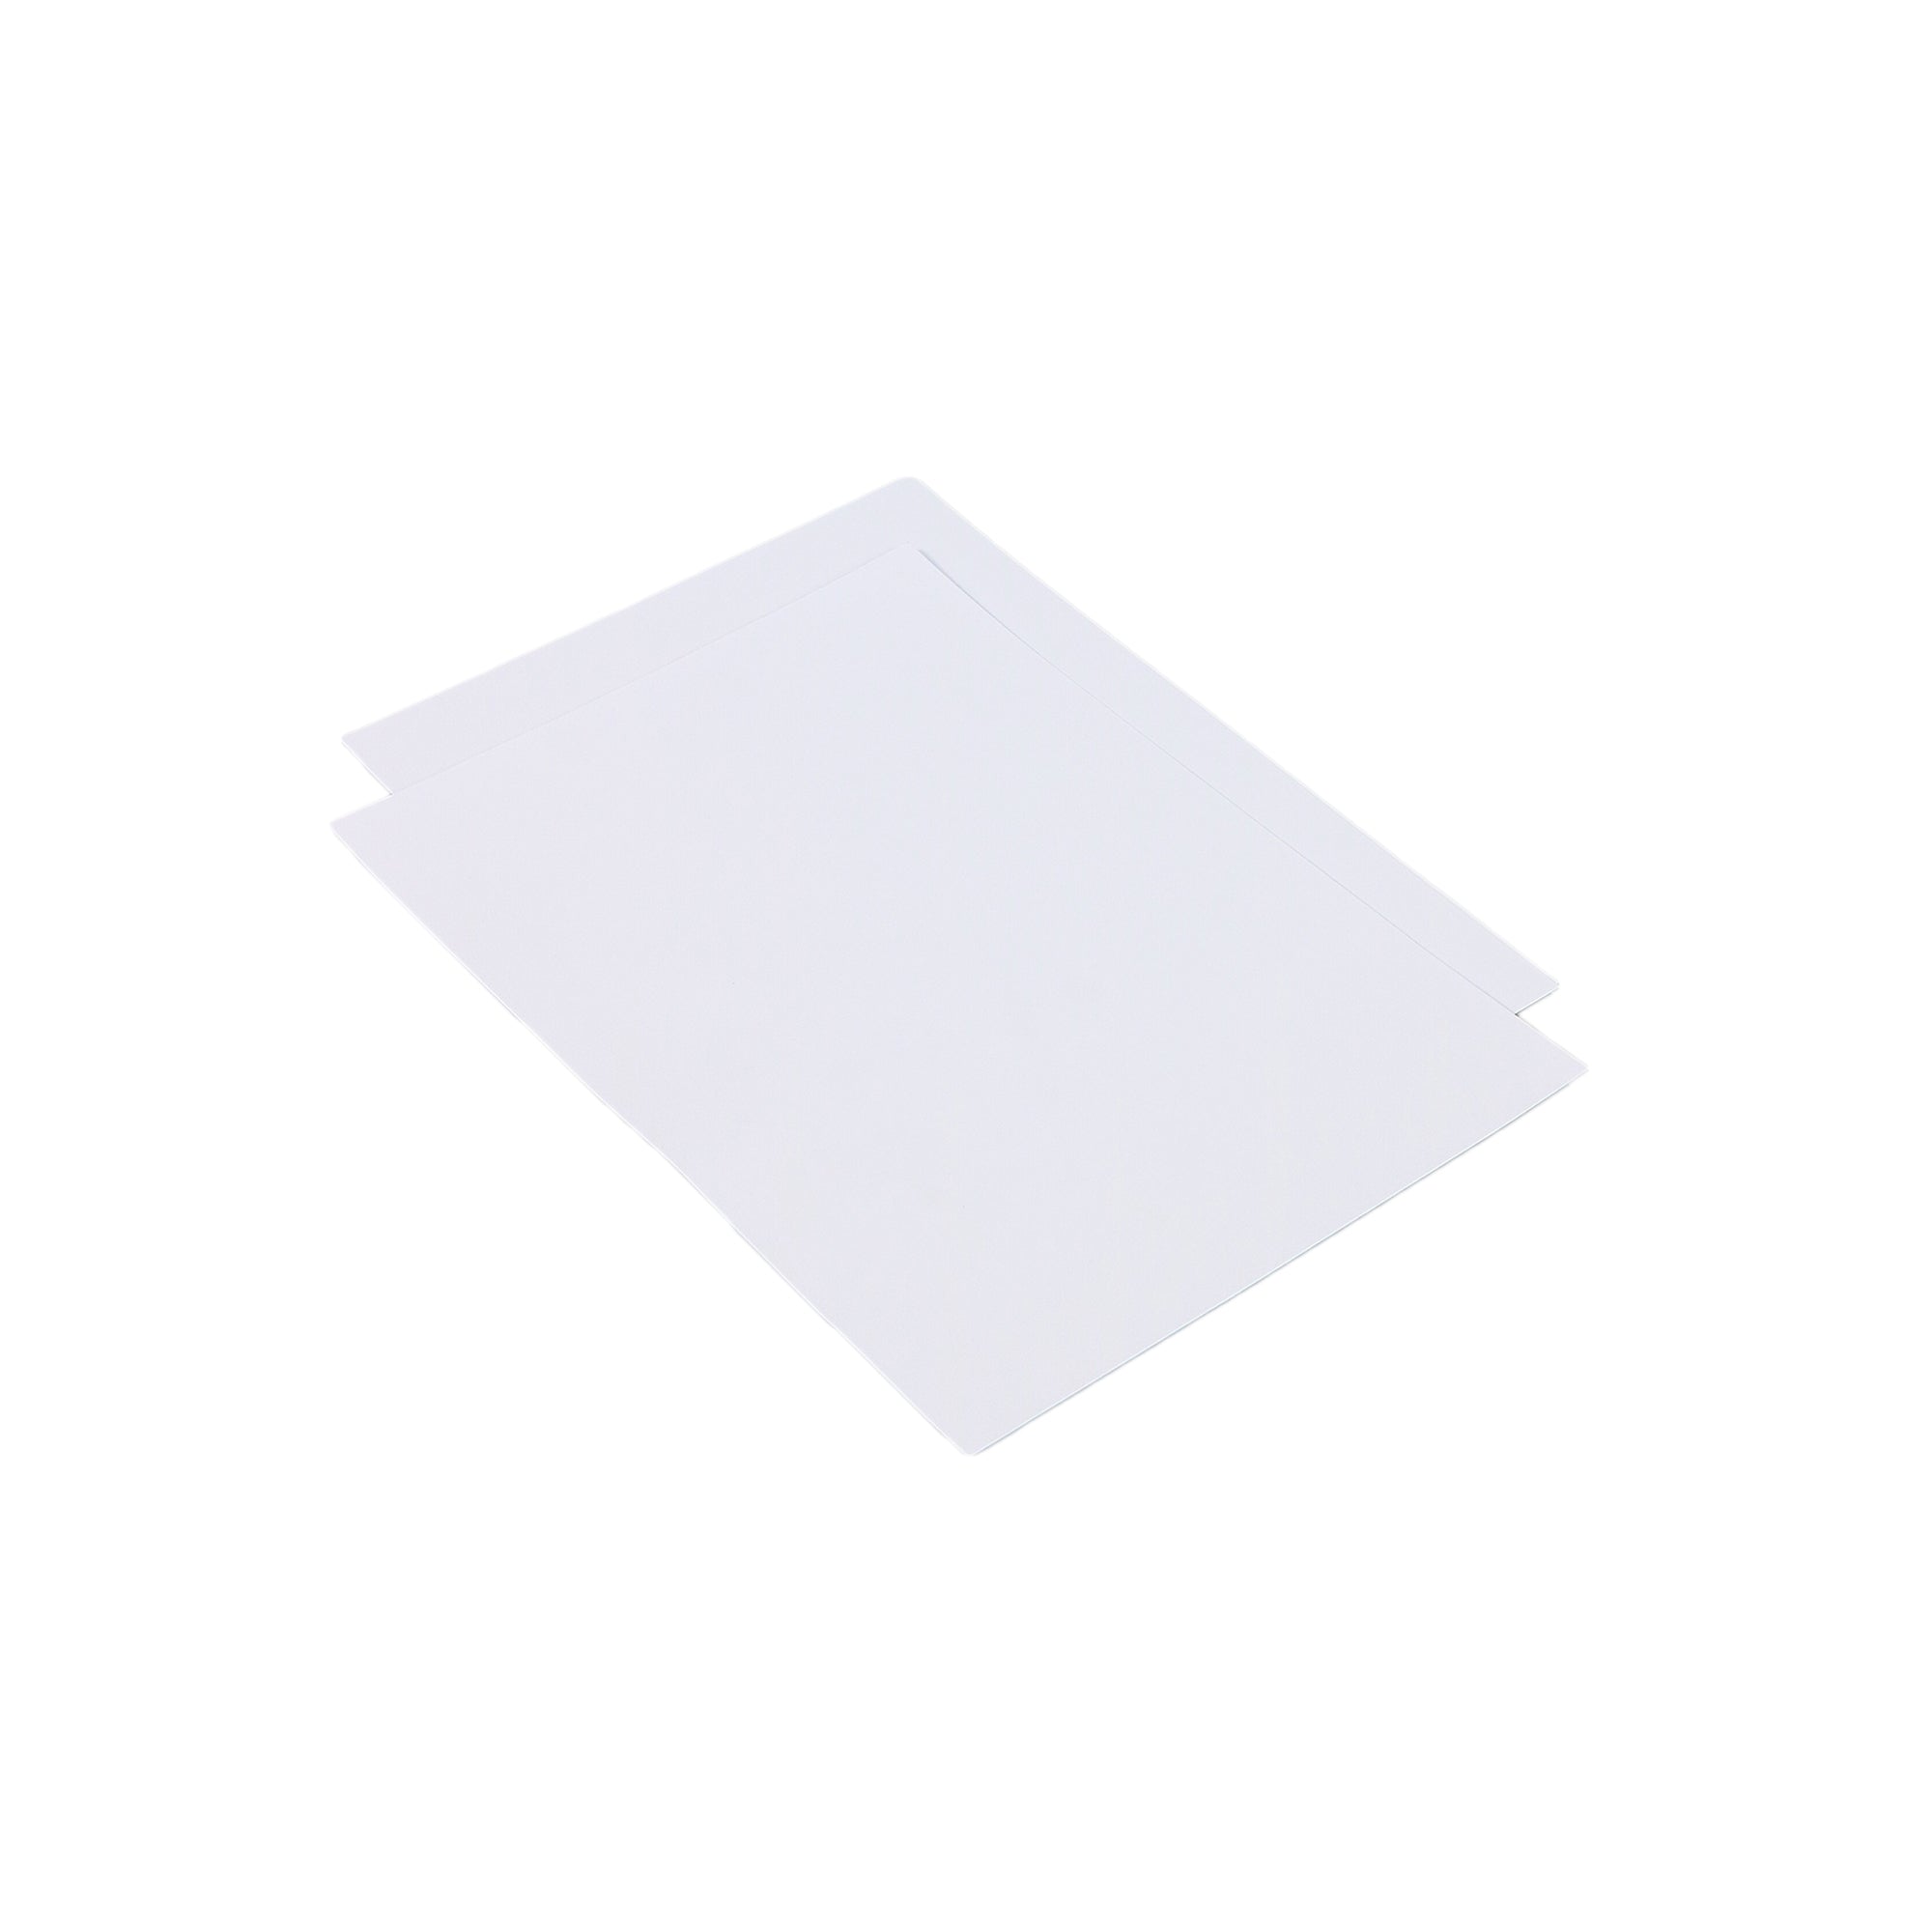 Project Board A4 White 10pack PRJ001